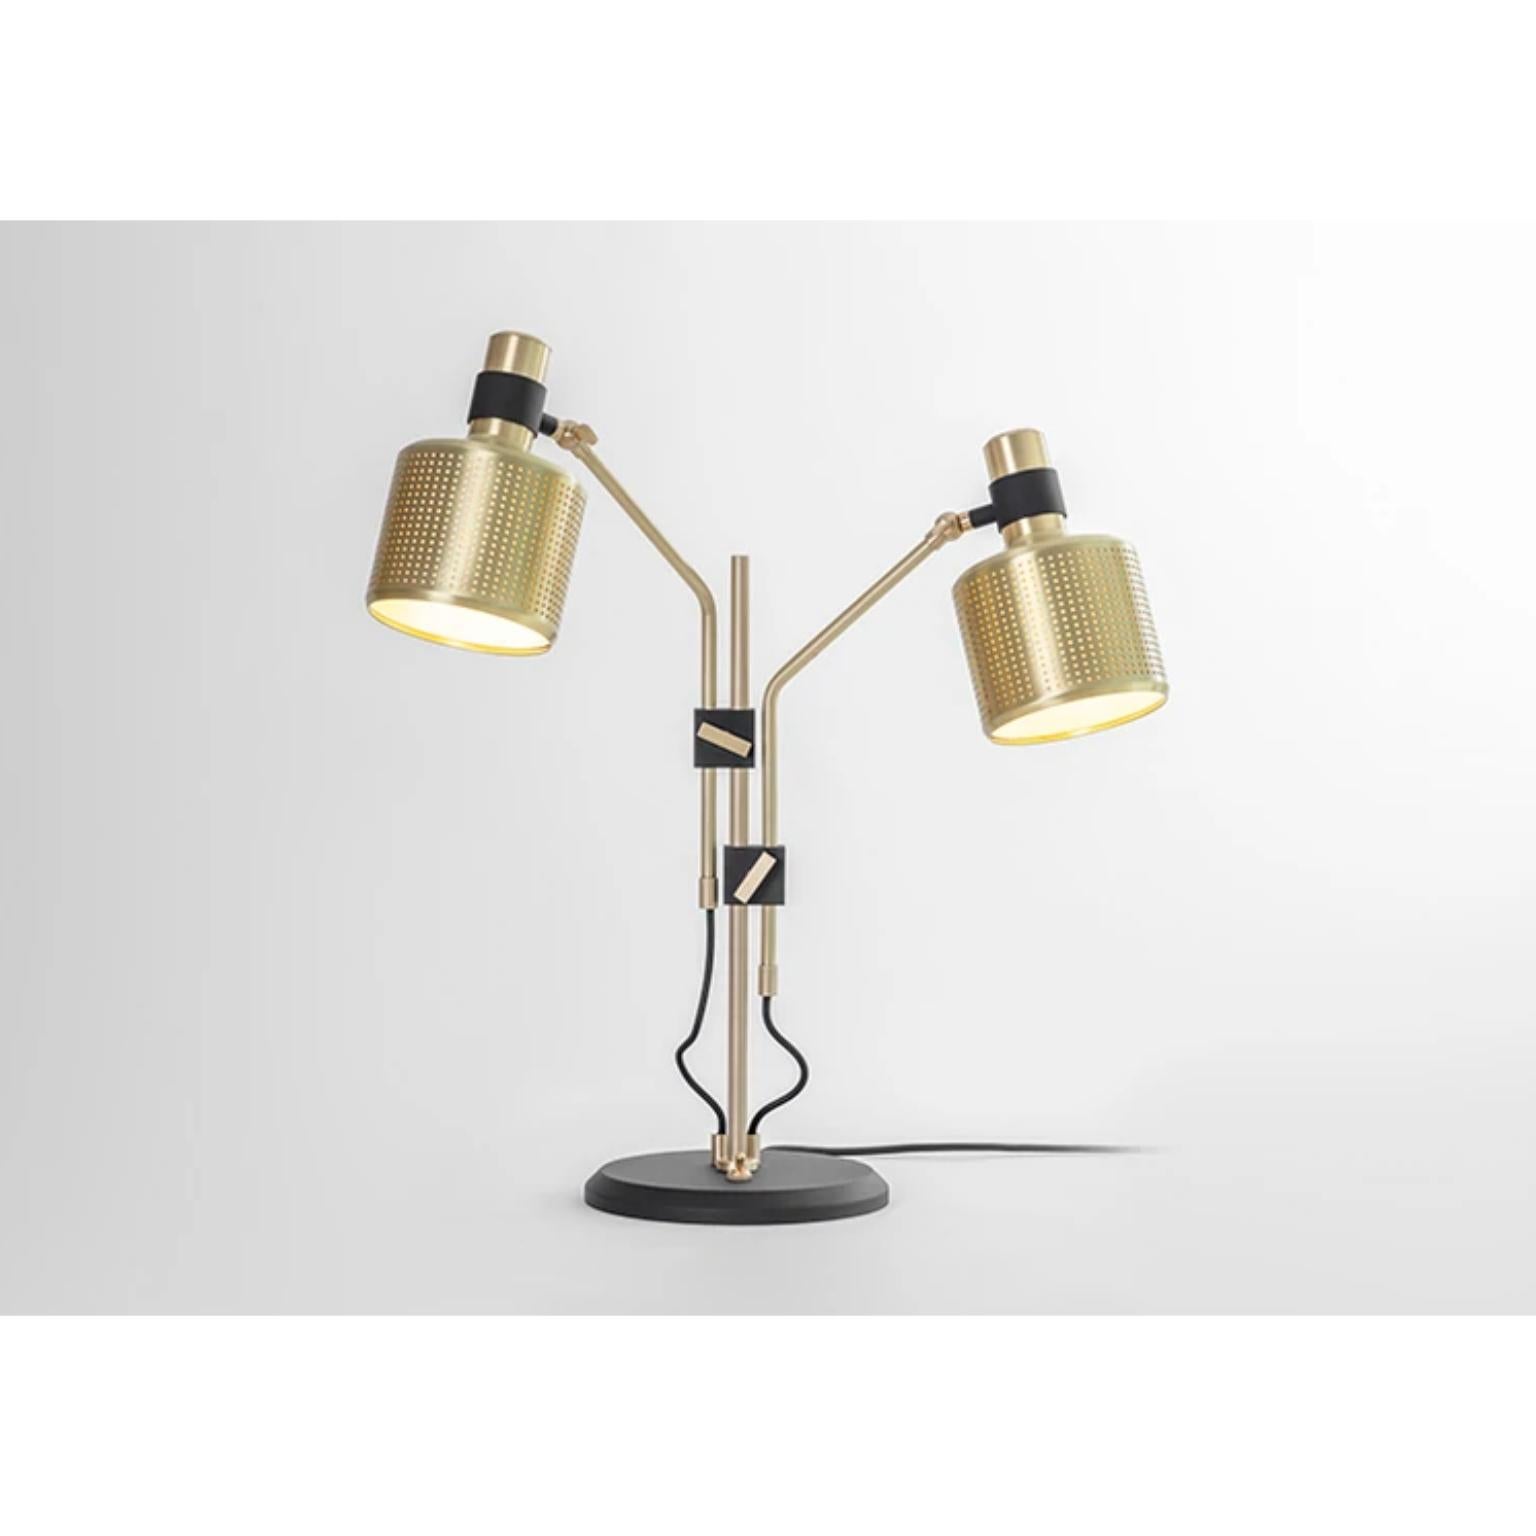 Riddle Double Table Lamp by Bert Frank
Dimensions: 20 x 50 x 55 cm 
Materials: Brass 

All our lamps can be wired according to each country. If sold to the USA it will be wired for the USA for instance.

When Adam Yeats and Robbie Llewellyn